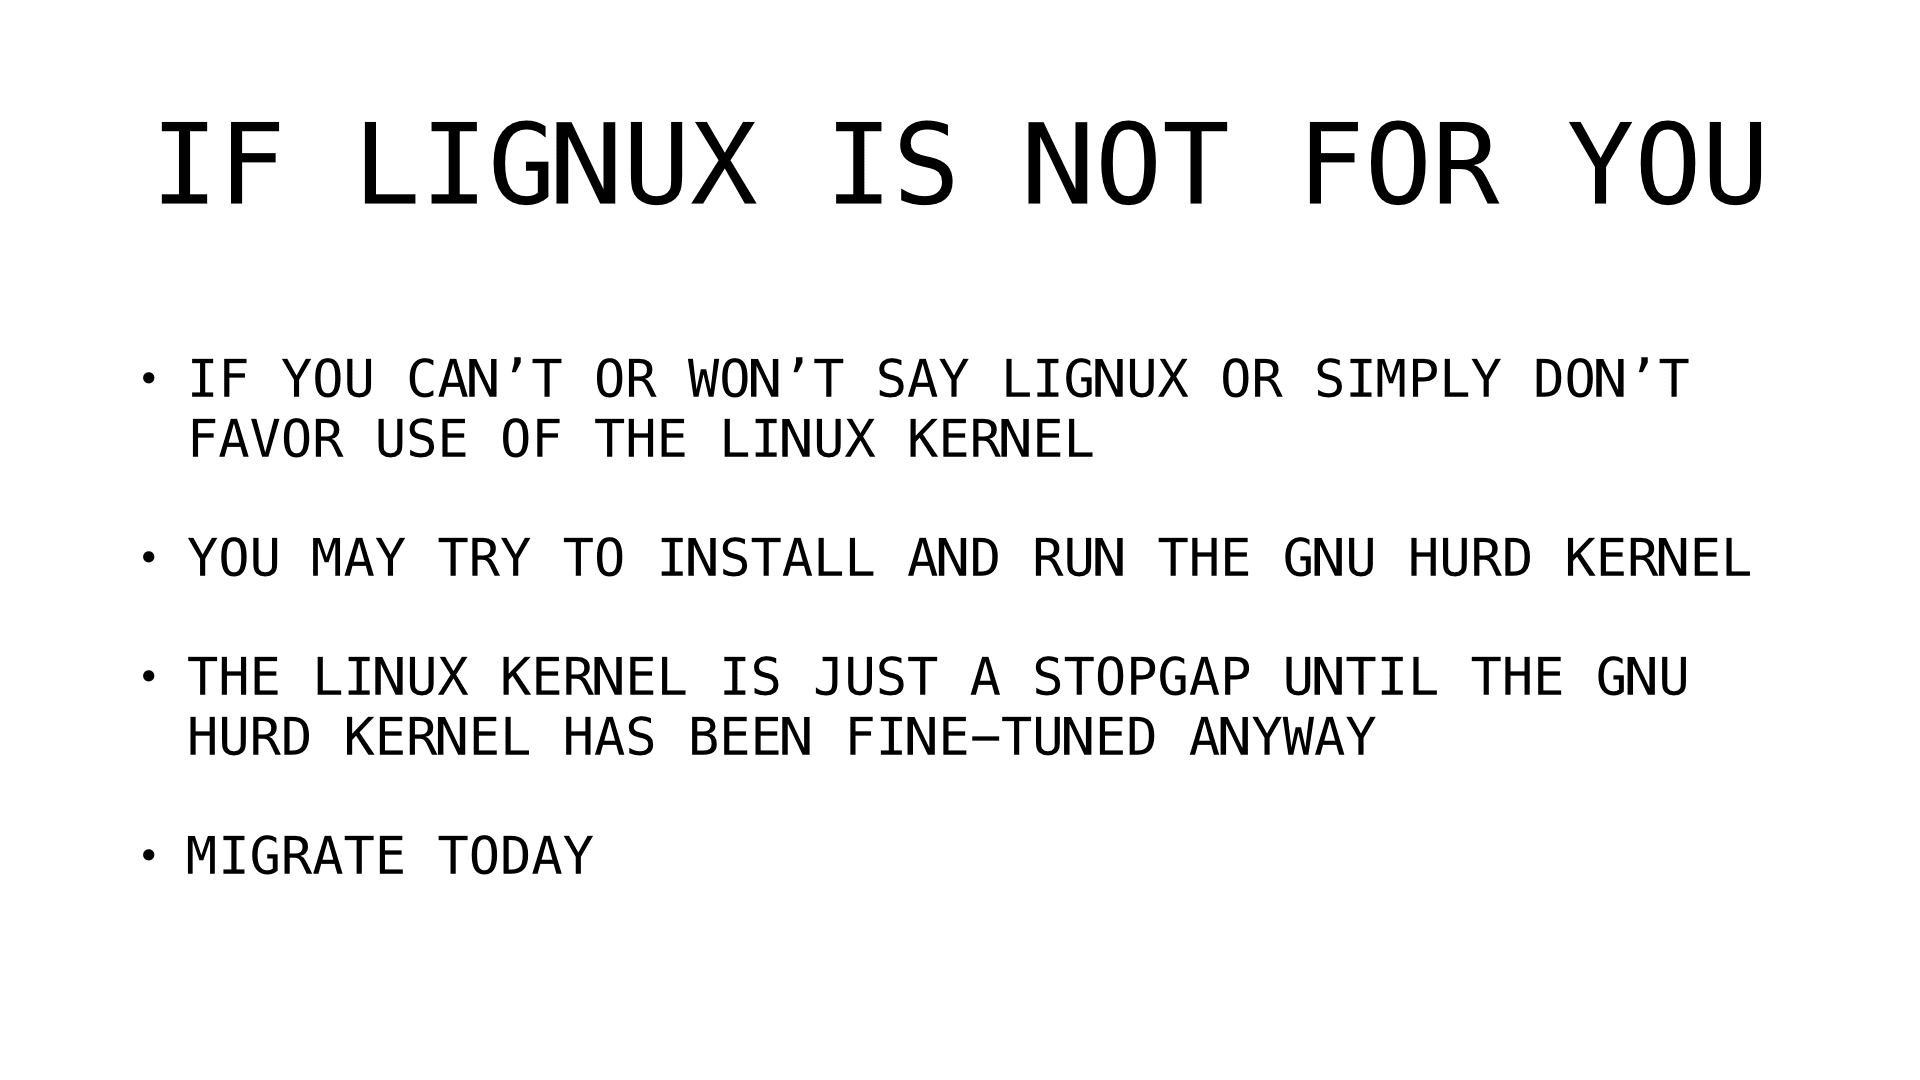 lignux is not for you